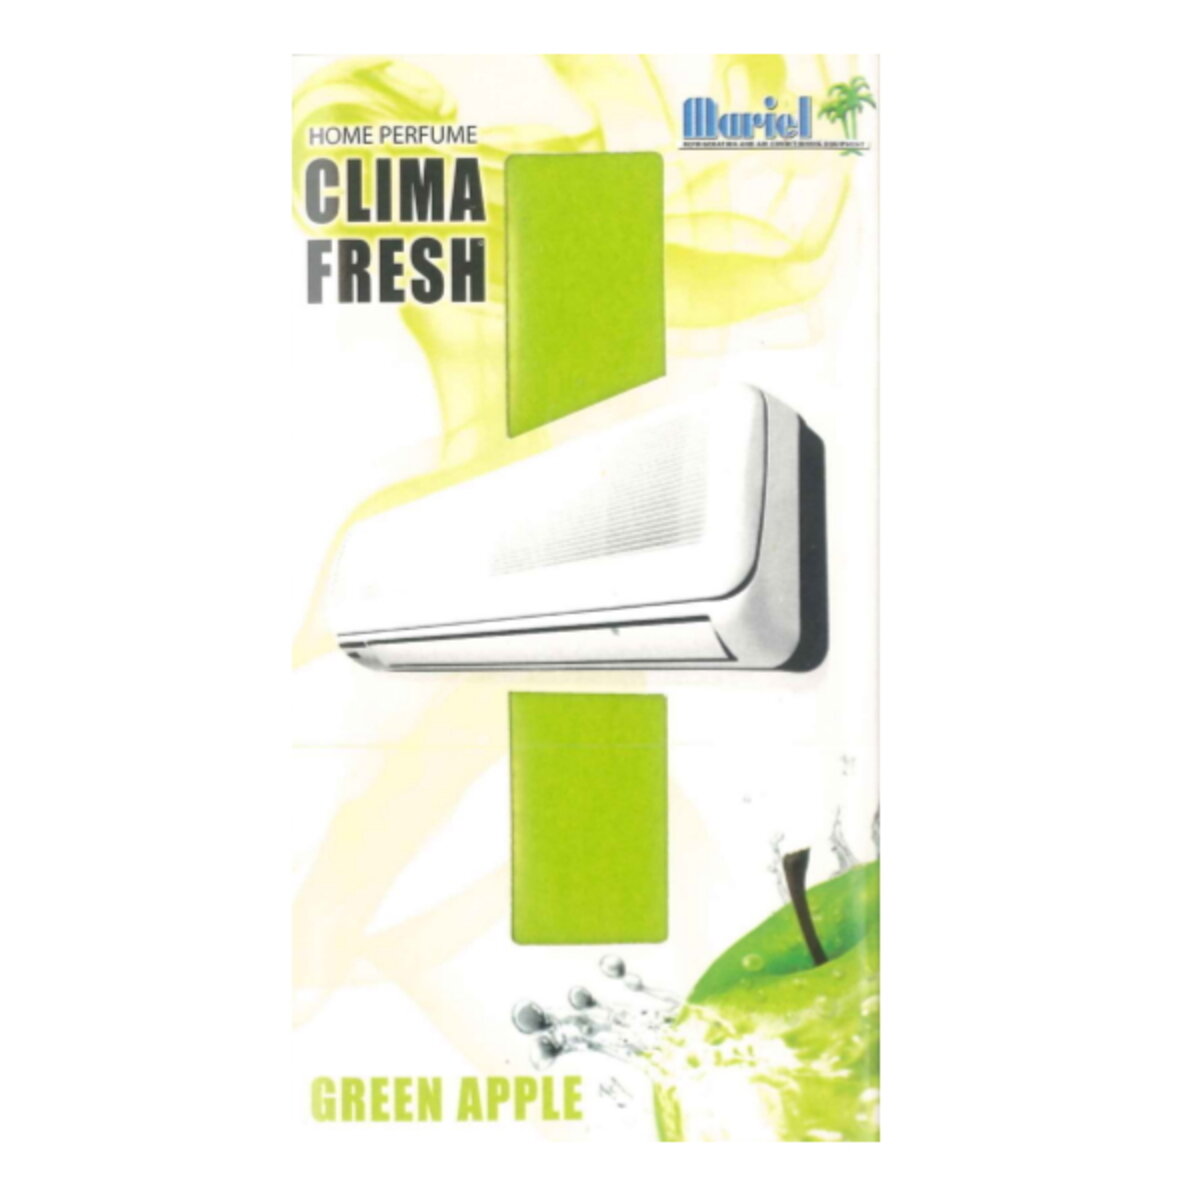 Air conditioner internal unit perfumer with green apple